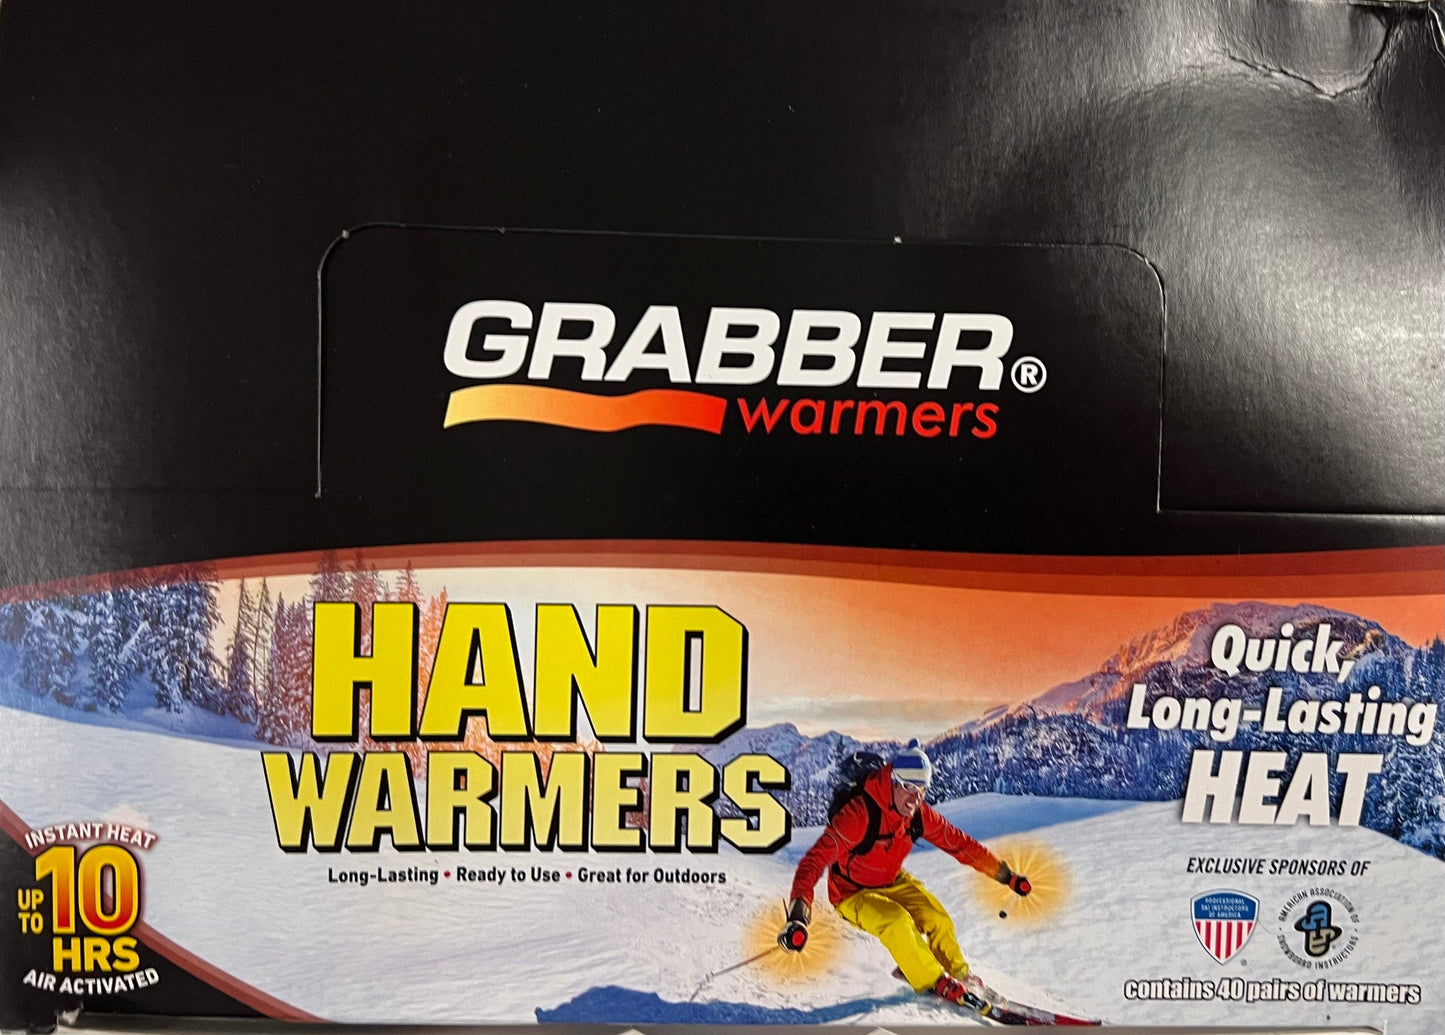 Grabber Ski & Ride Hand Warmers - Long Lasting Natural Odorless Air Activated Warmers - Up to 10 Hours of Heat - 40 Pair Box